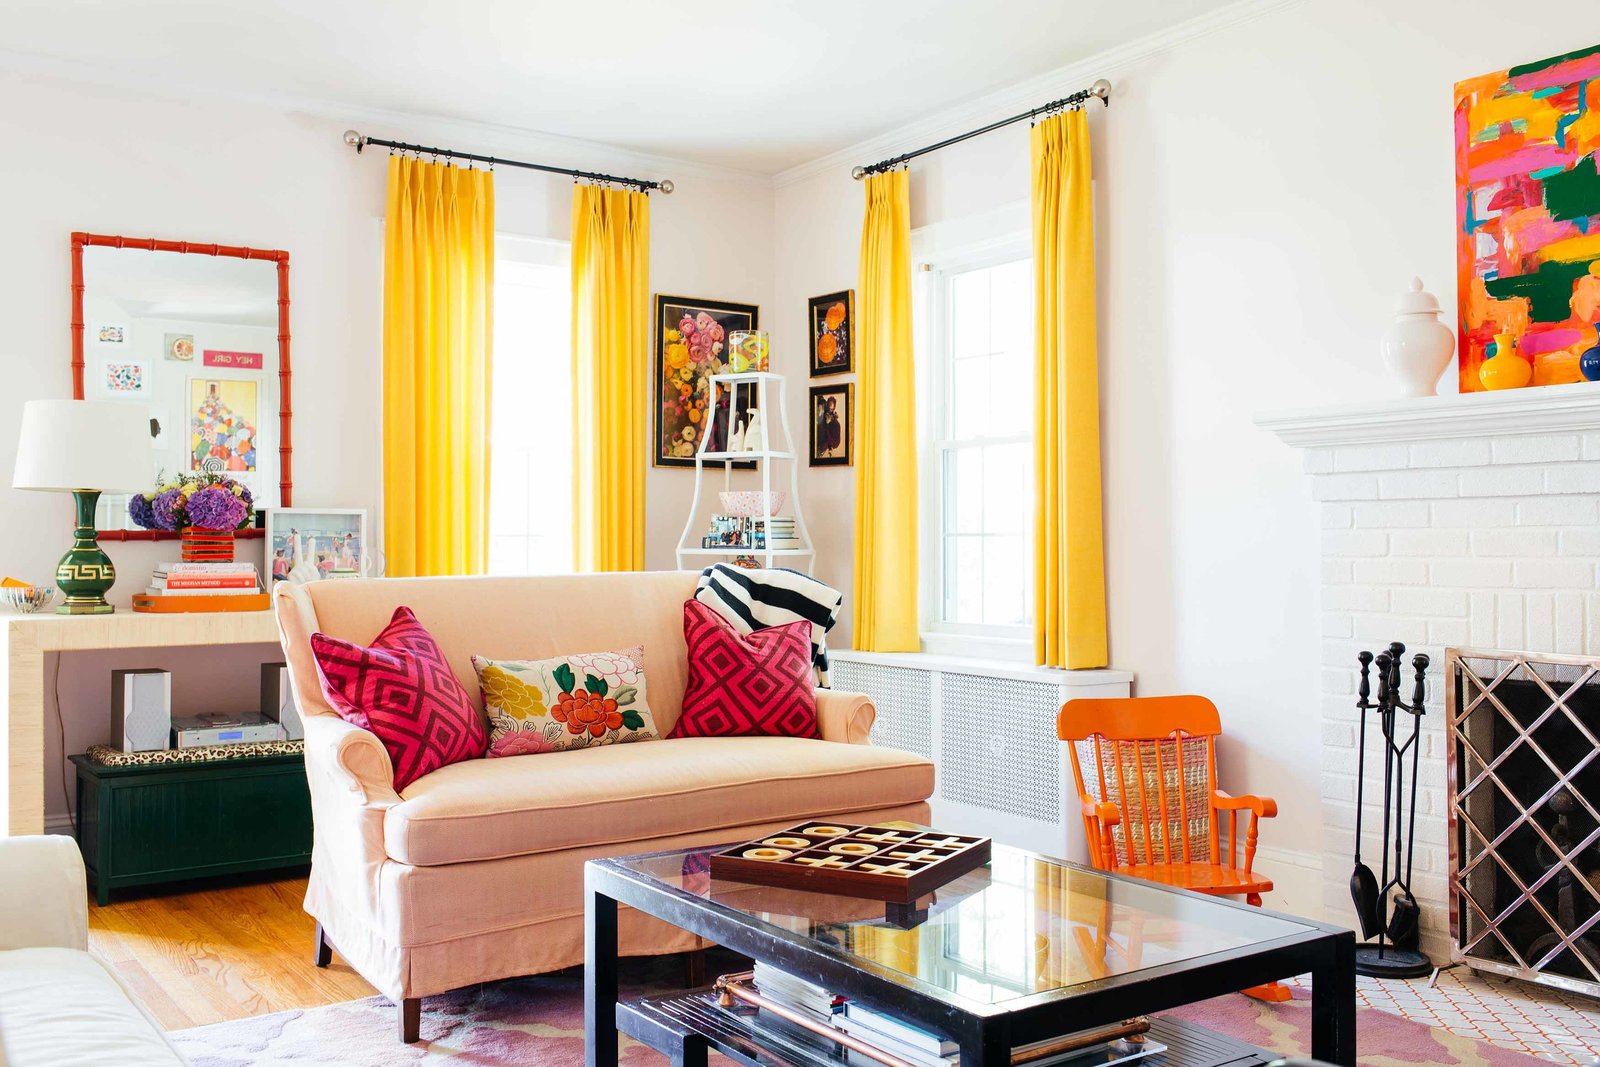 A peach love seat in a colorful living room.